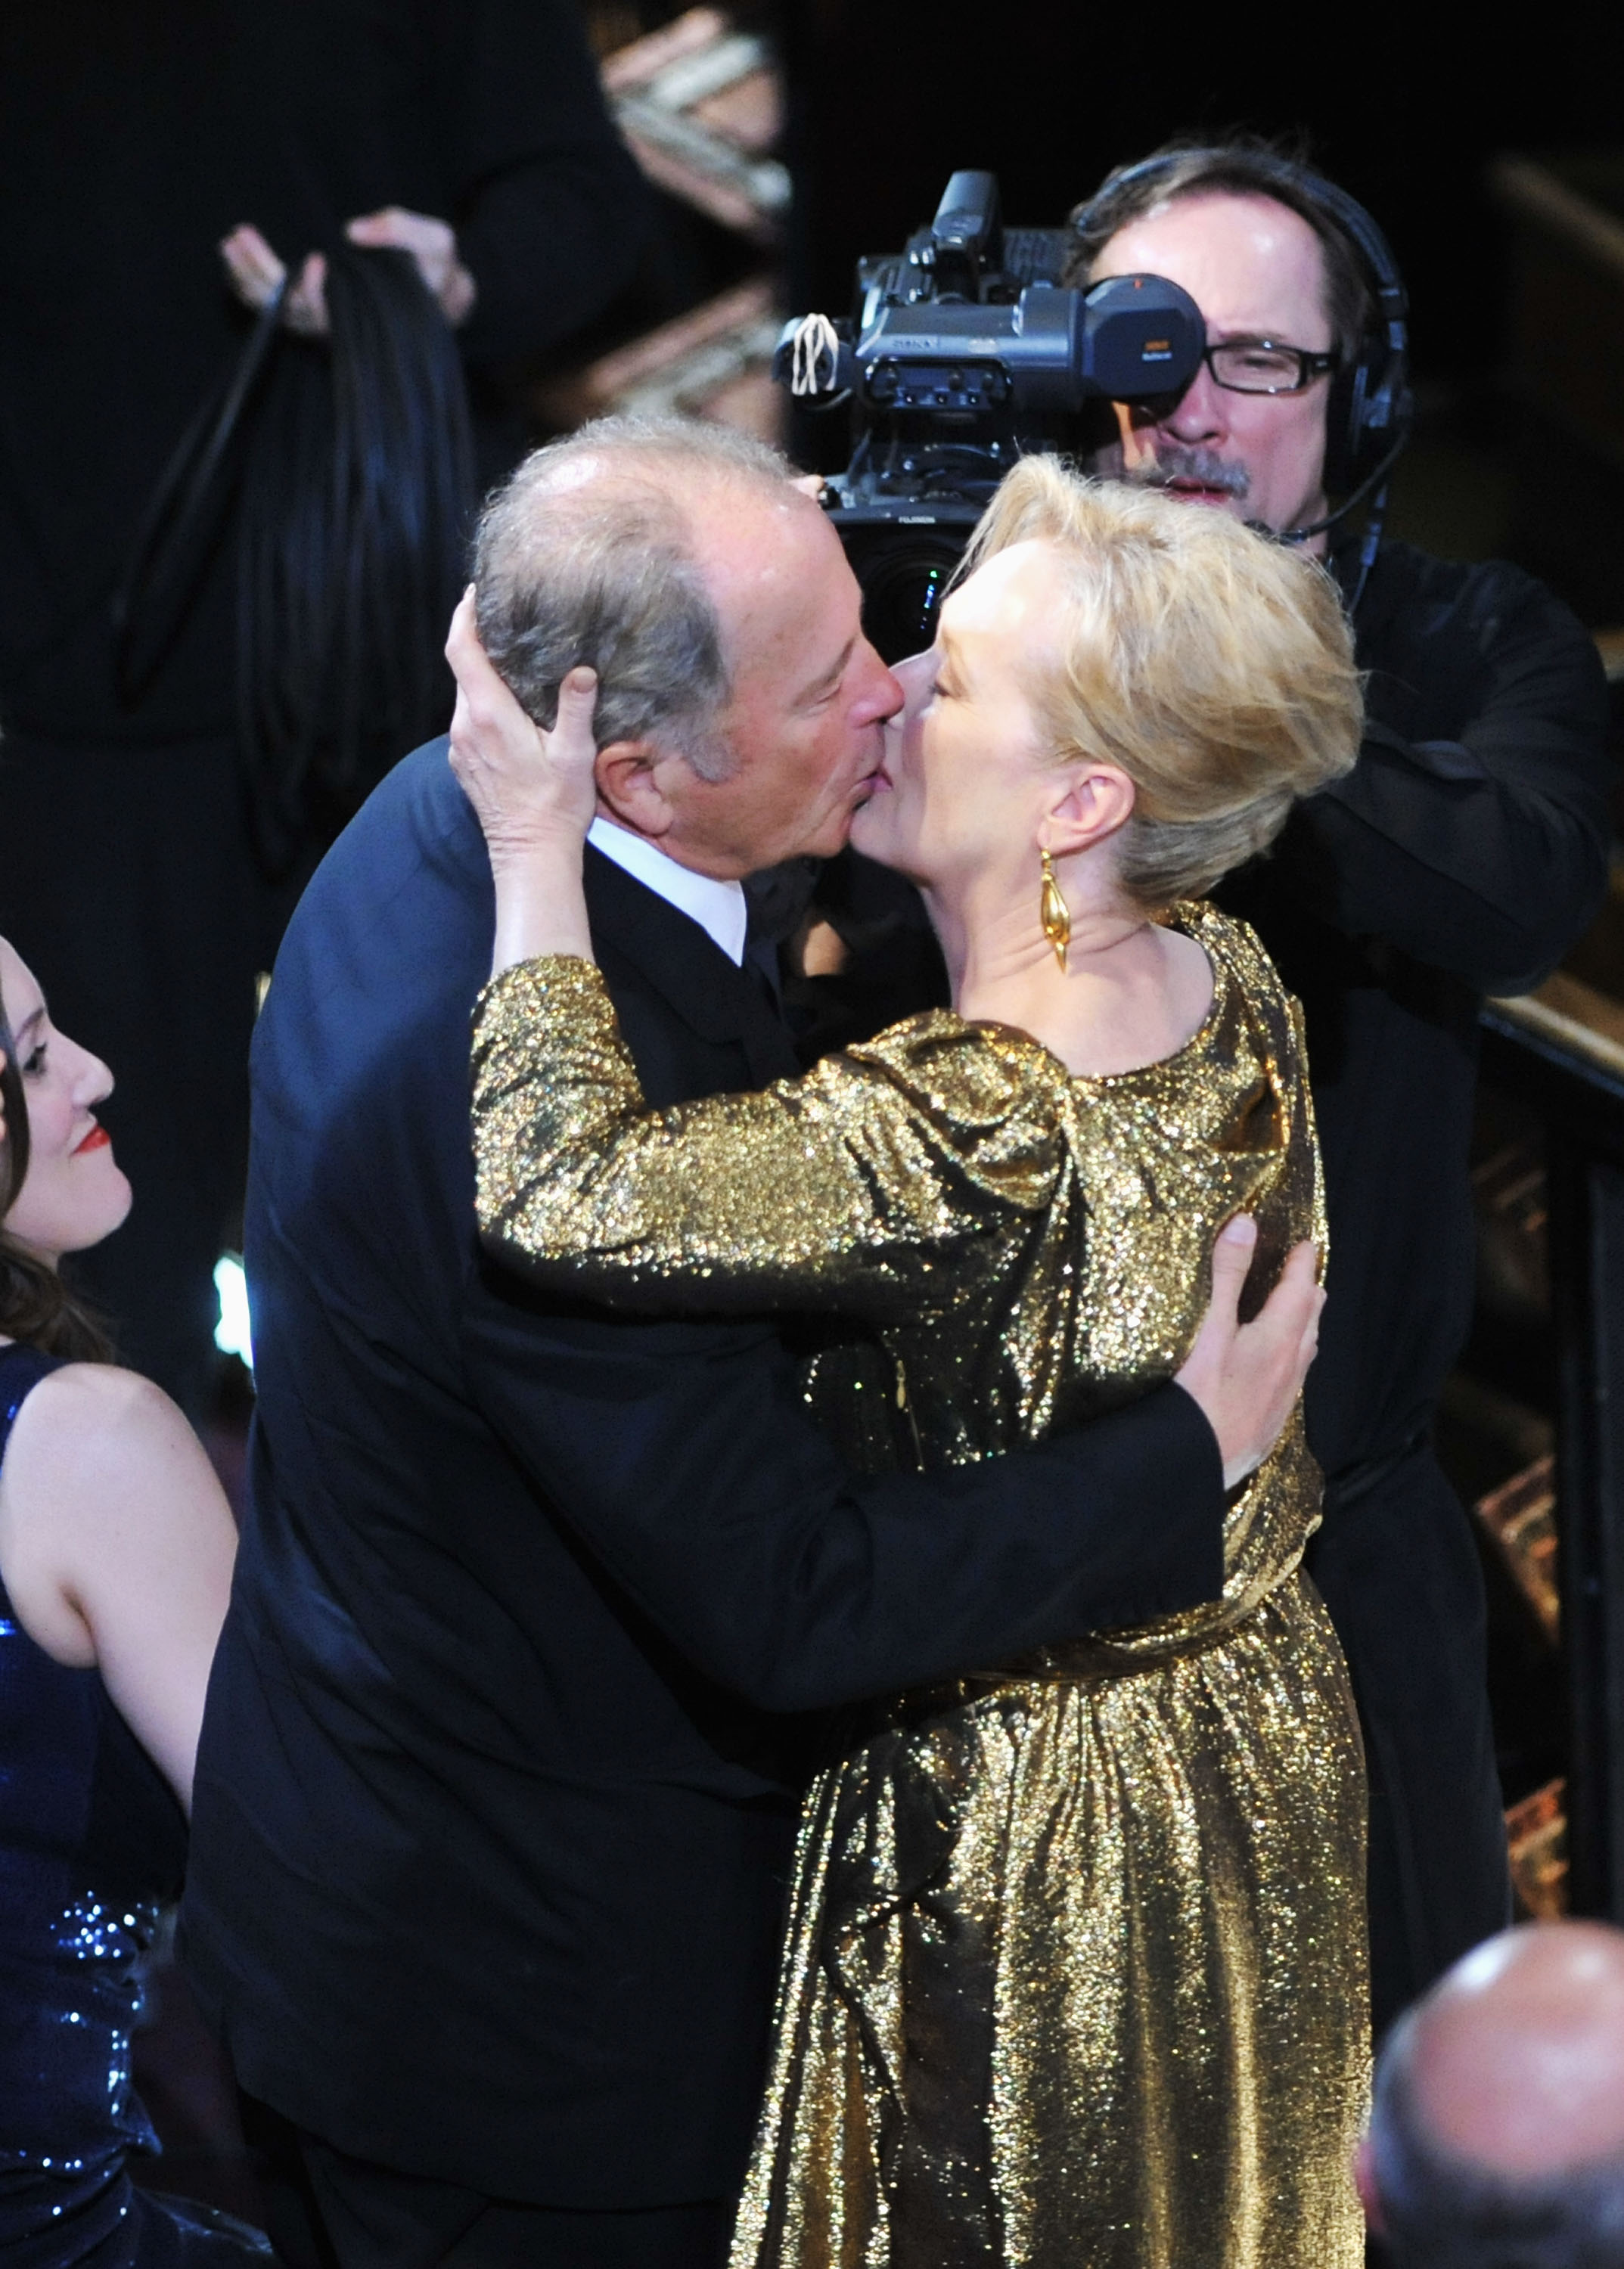 Don Gummer and Meryl Streep during the 84th Annual Academy Awards at the Hollywood & Highland Center on February 26, 2012 in Hollywood, California. | Source: Getty Images